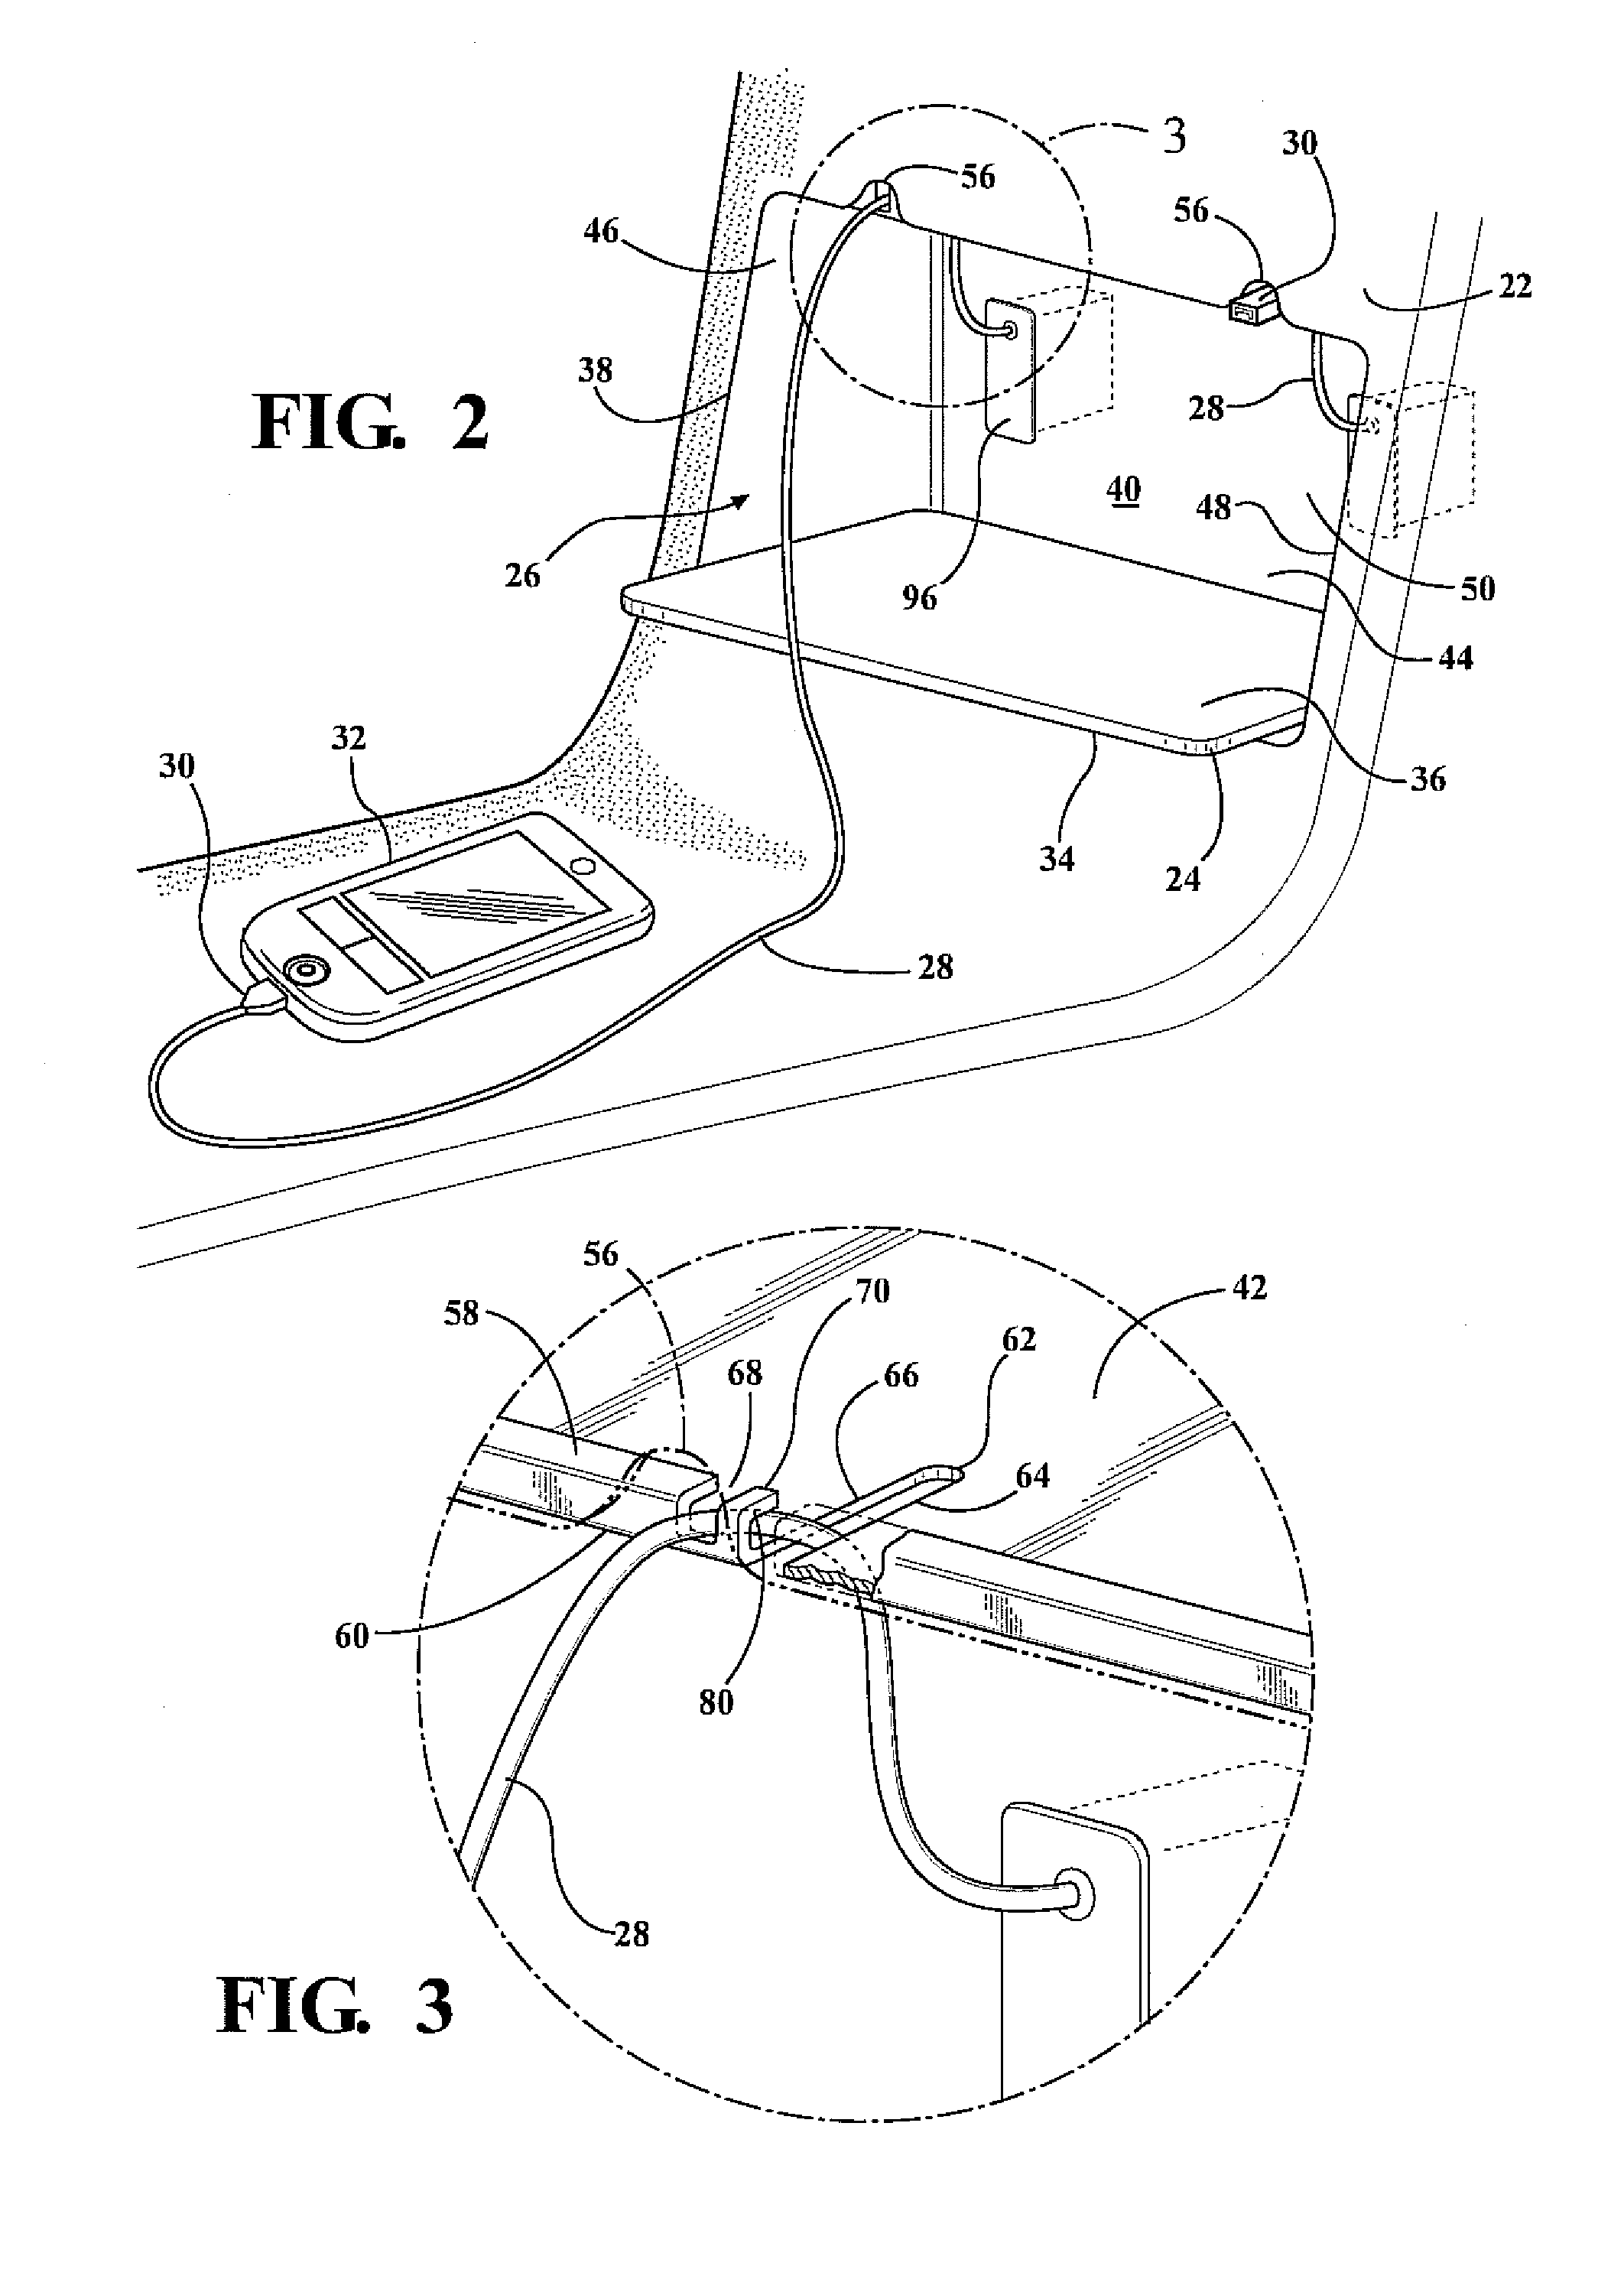 Storage assembly having retractable power cord